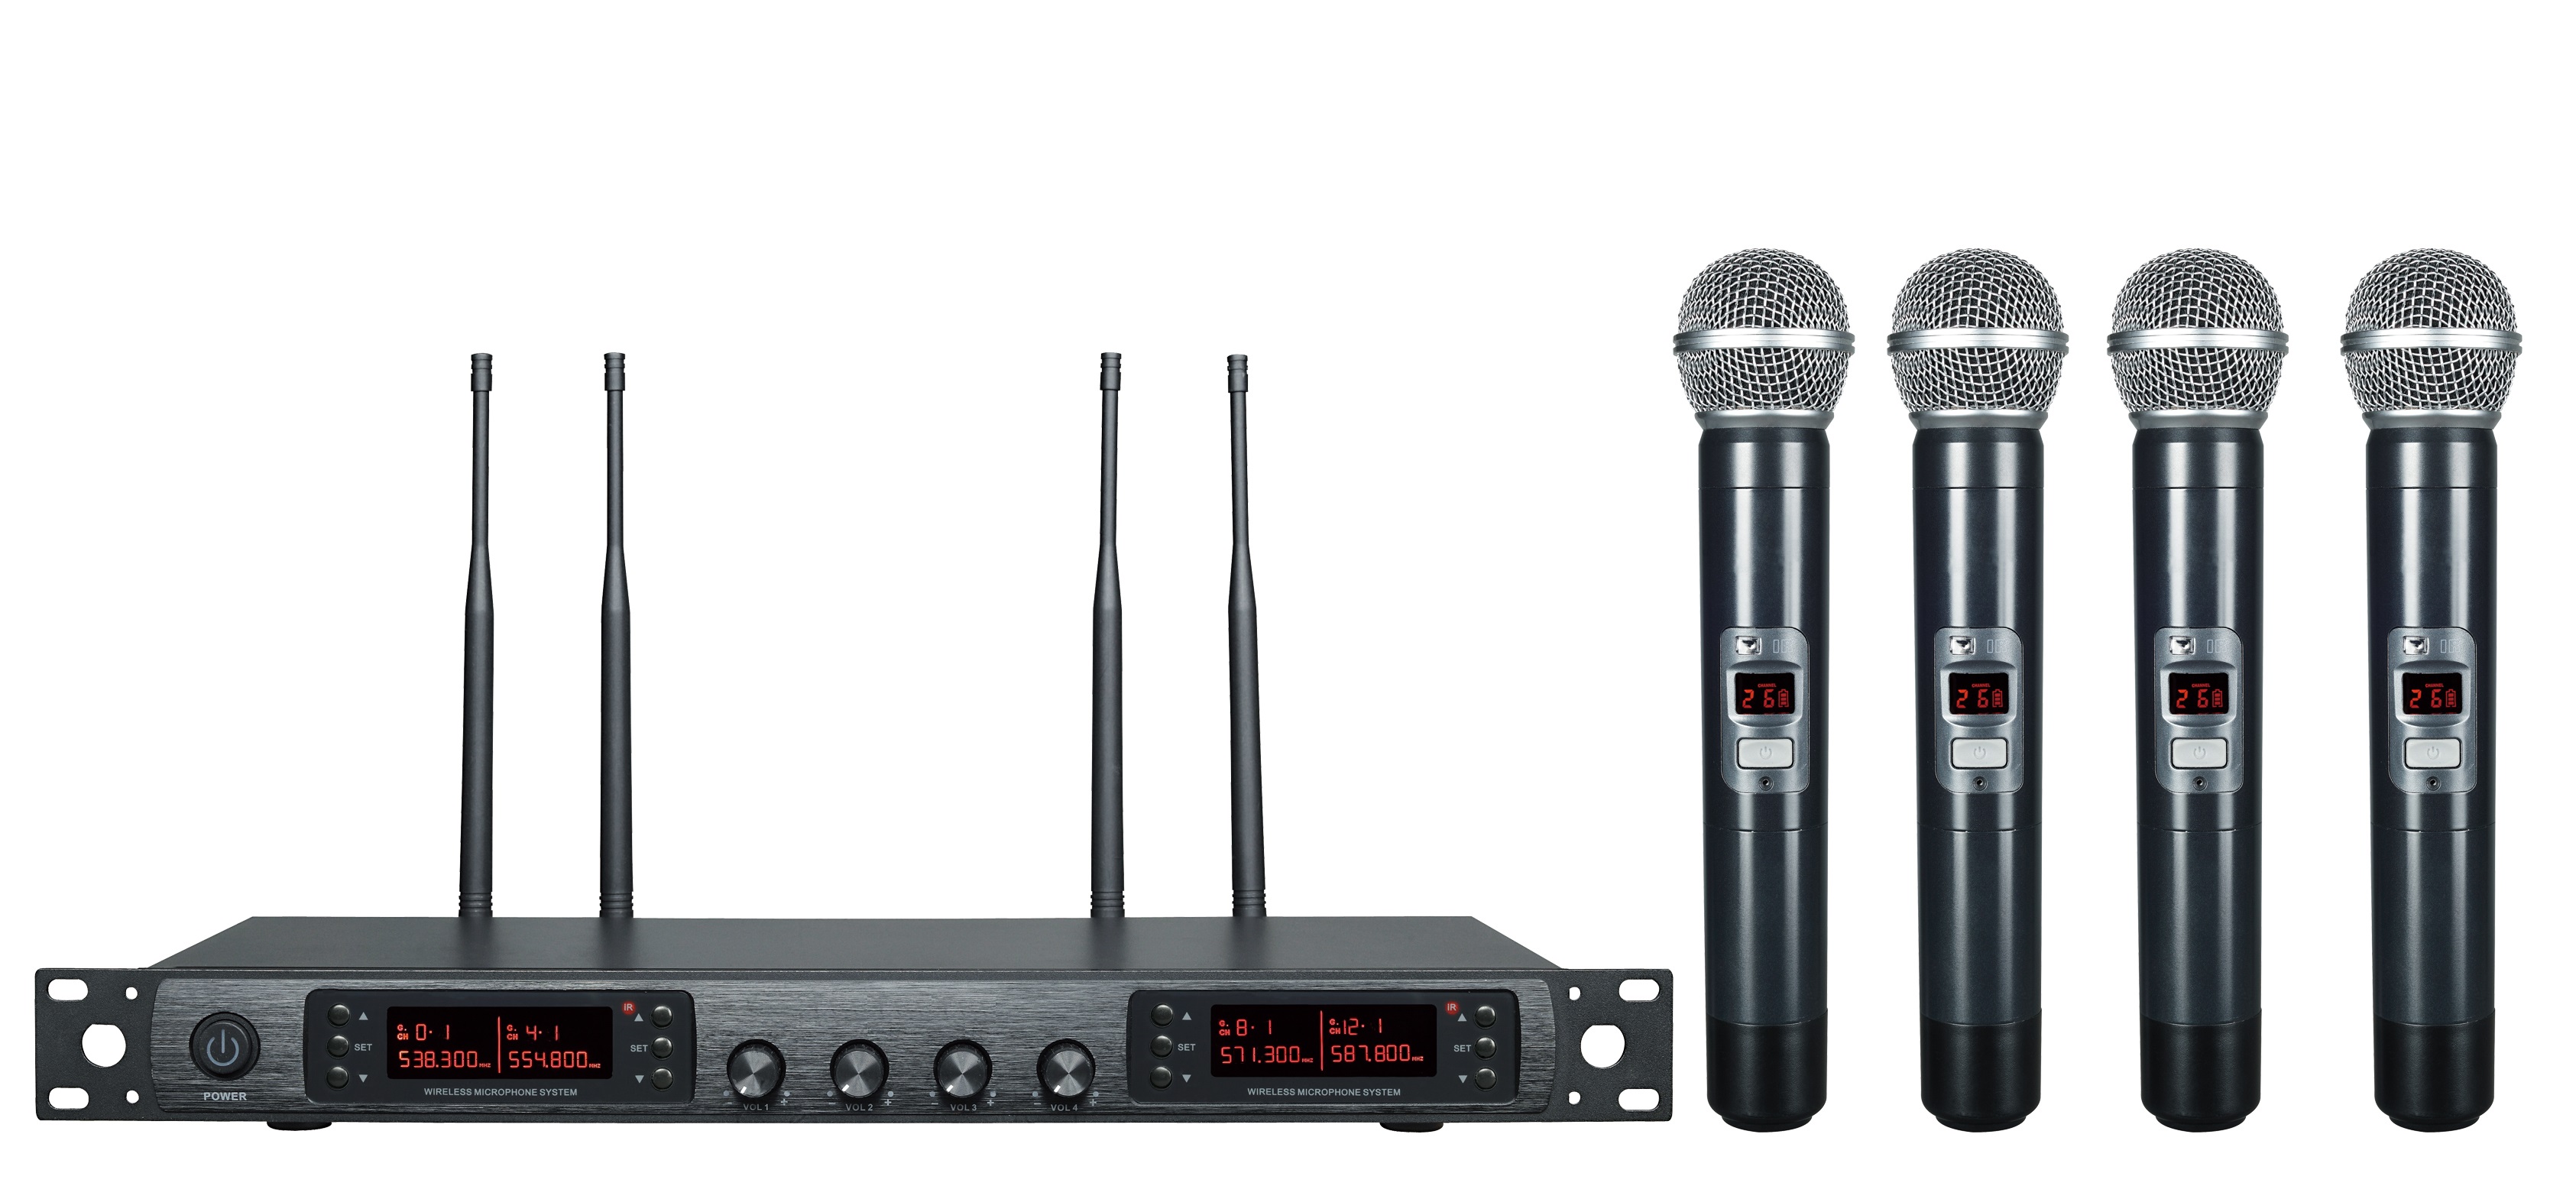 UHF023A Wireless microphones